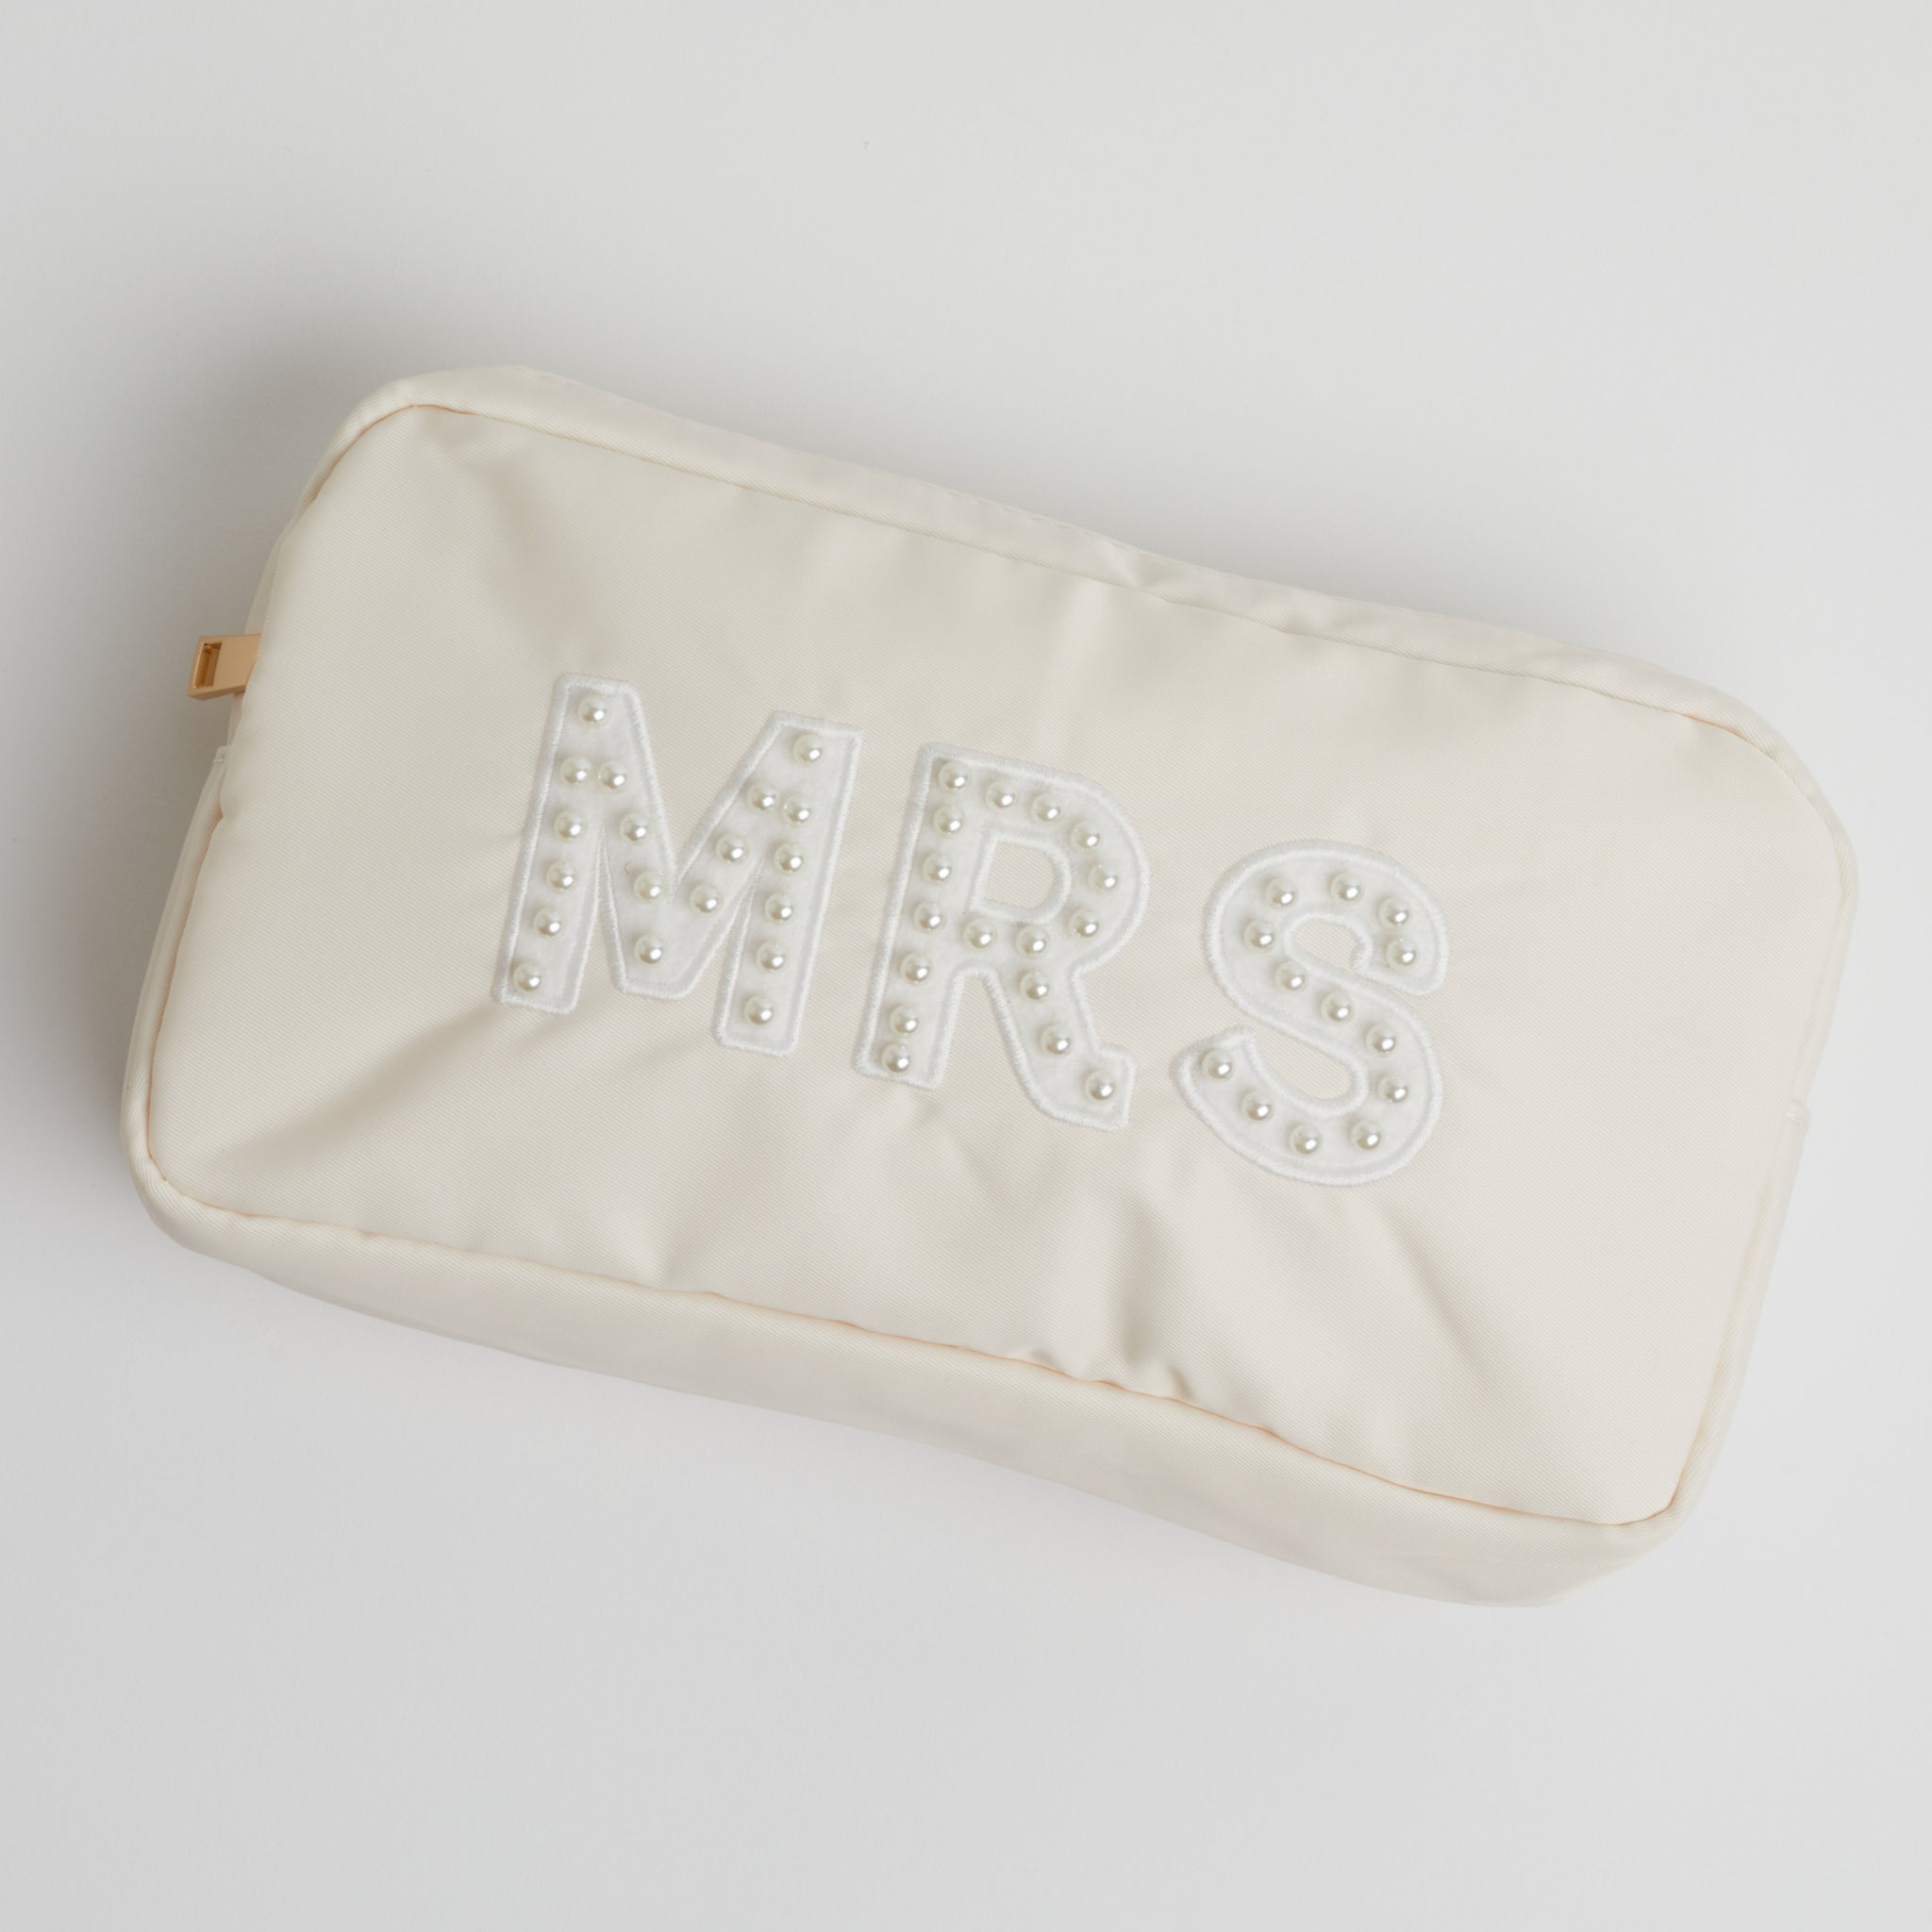 A pearl embroidered nude-colored MRS pouch on a white background